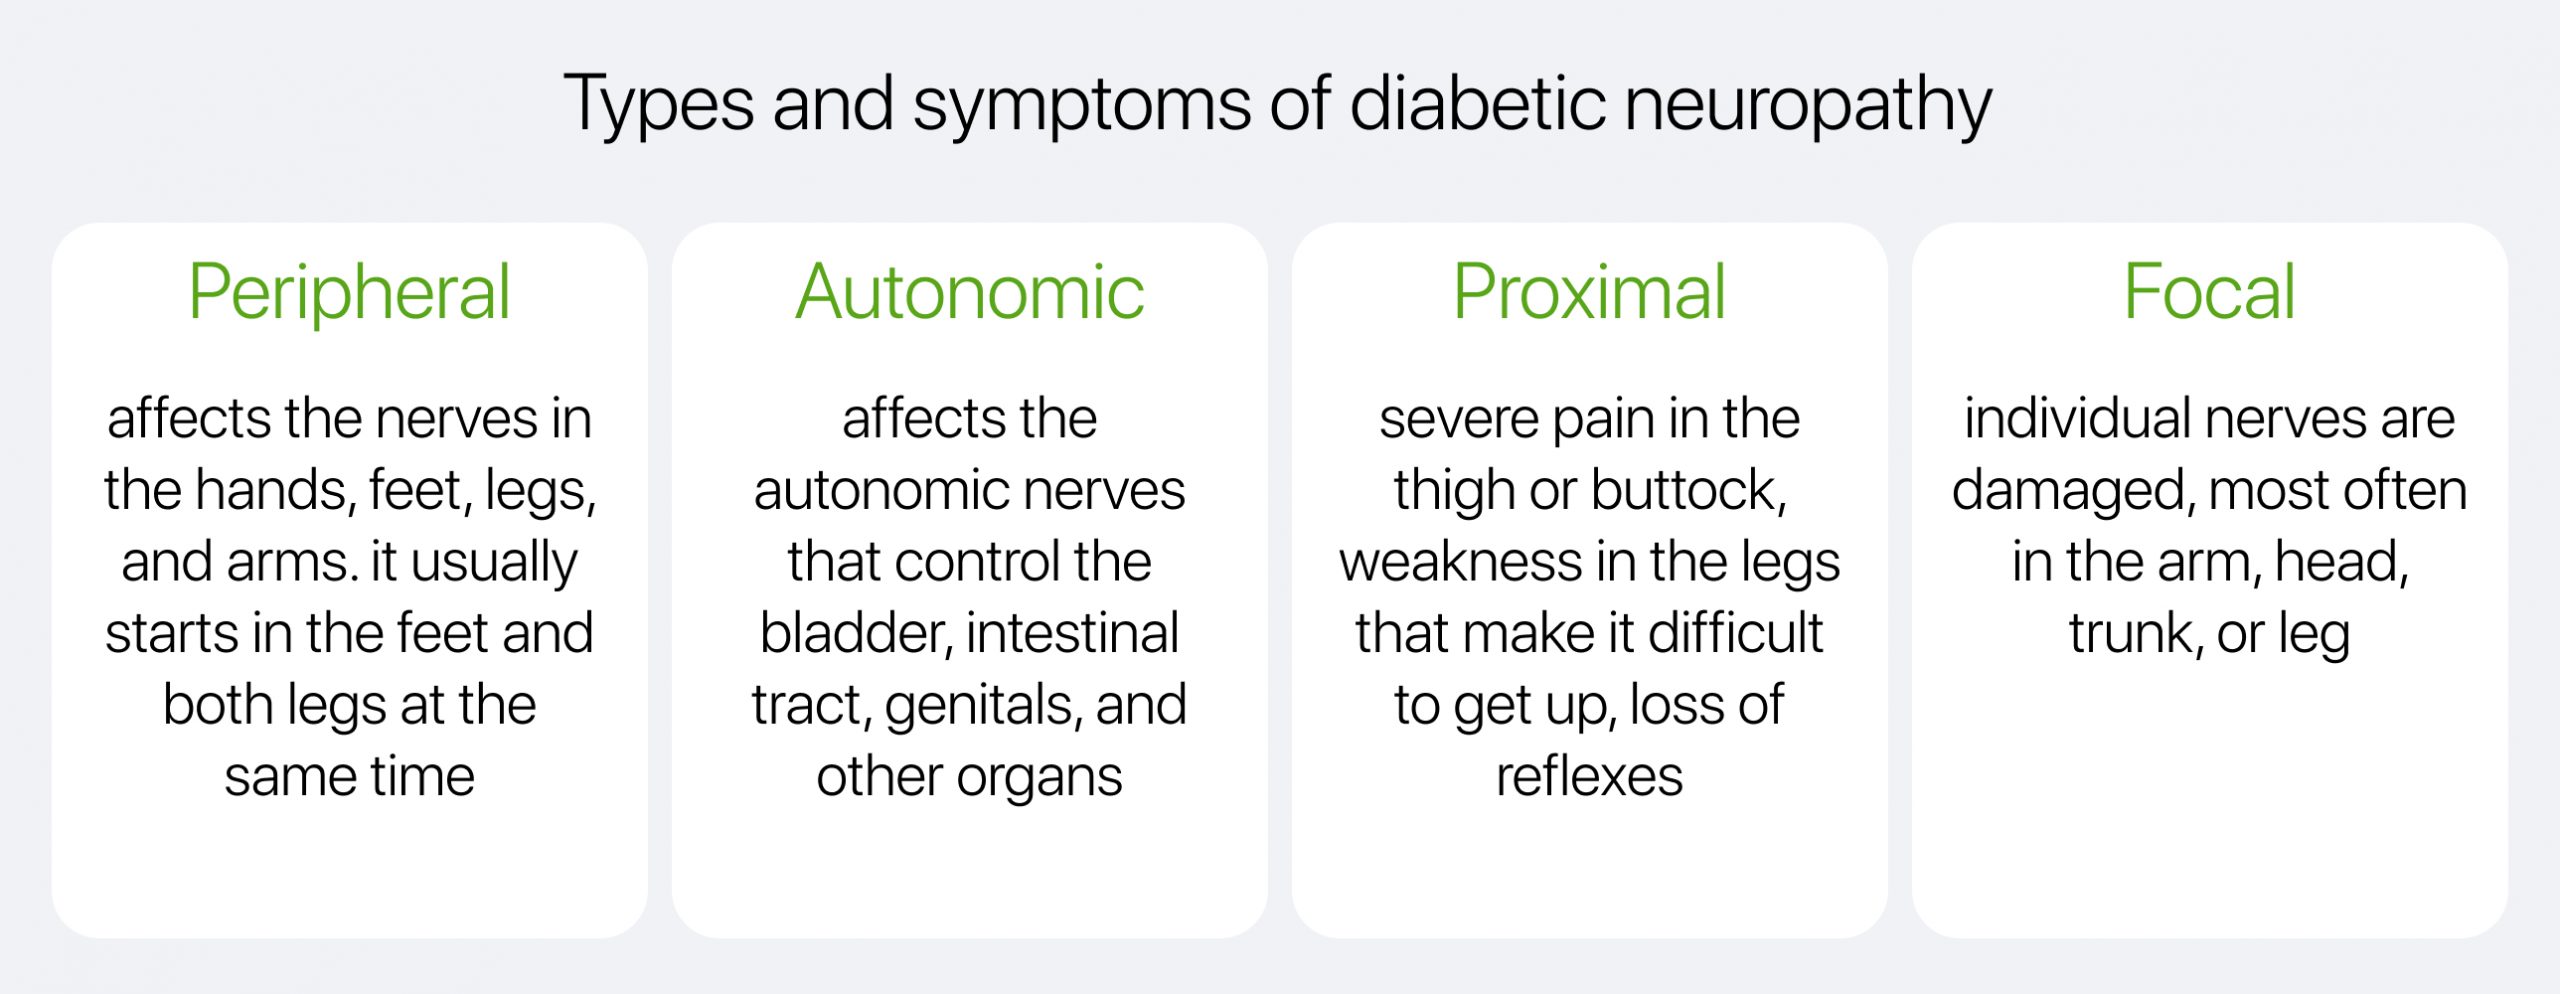 Types and symptoms of diabetic neuropathy